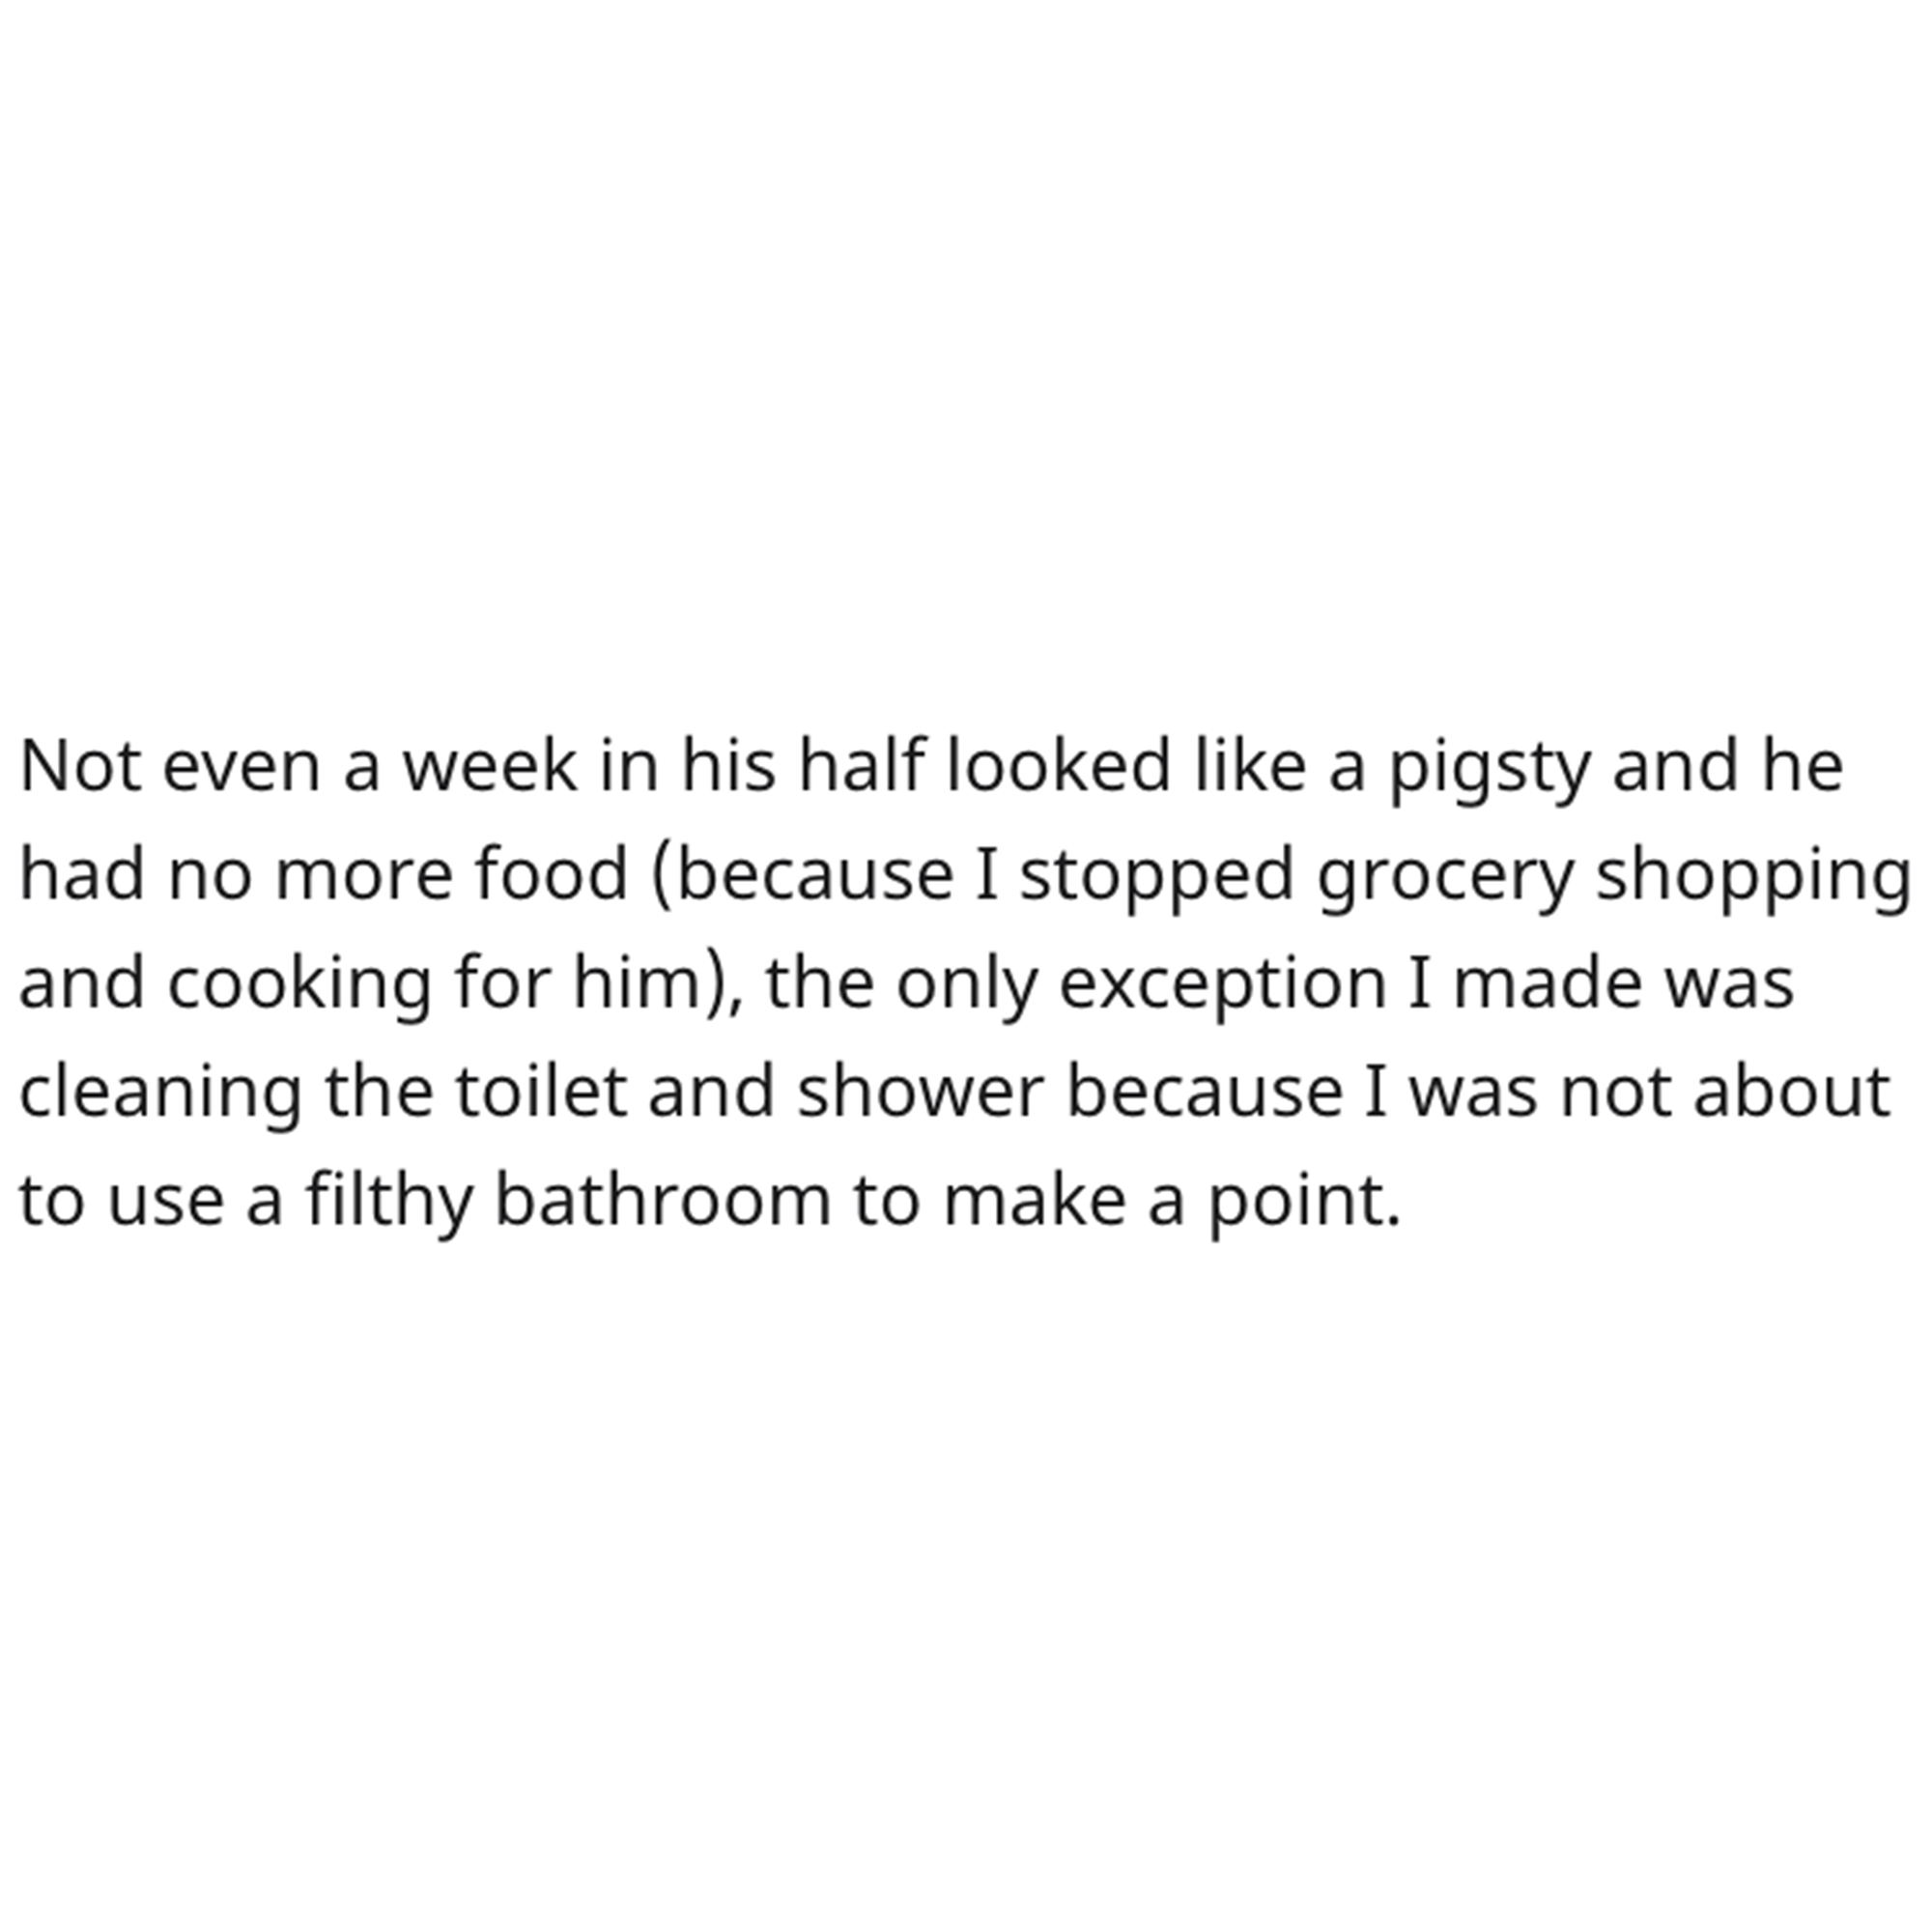 Cleaning Contest Reddit Story - im done quotes - Not even a week in his half looked a pigsty and he had no more food because I stopped grocery shopping and cooking for him, the only exception I made was cleaning the toilet and shower because I was not abo